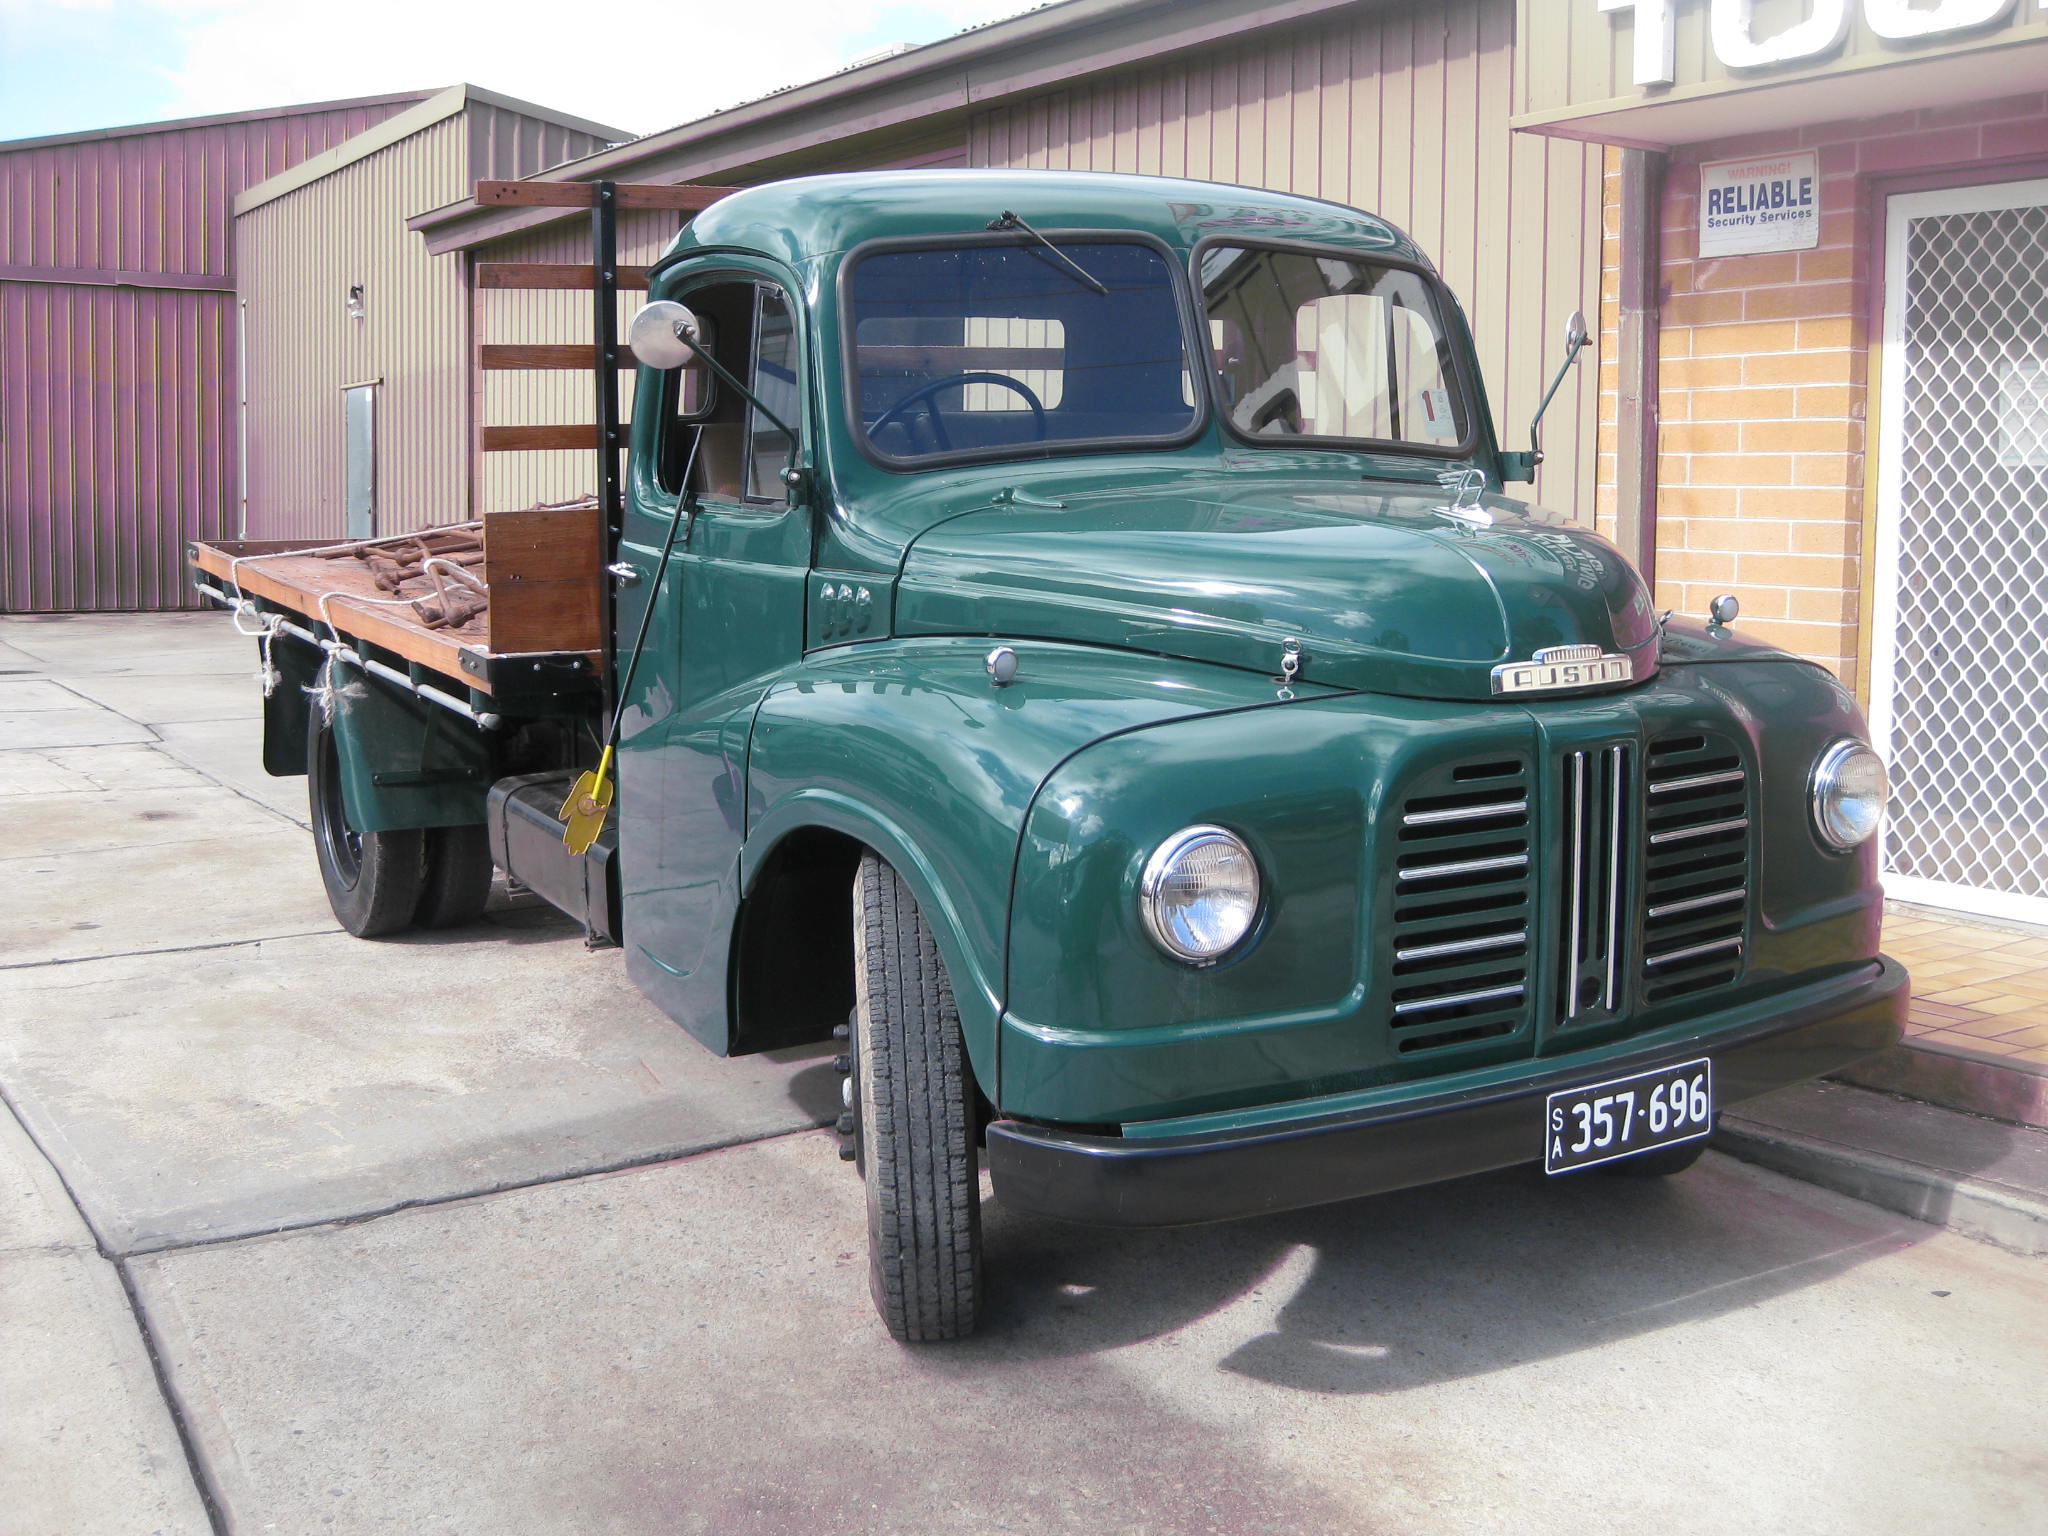 1952 Austin K2 Truck – Collectable Classic Cars